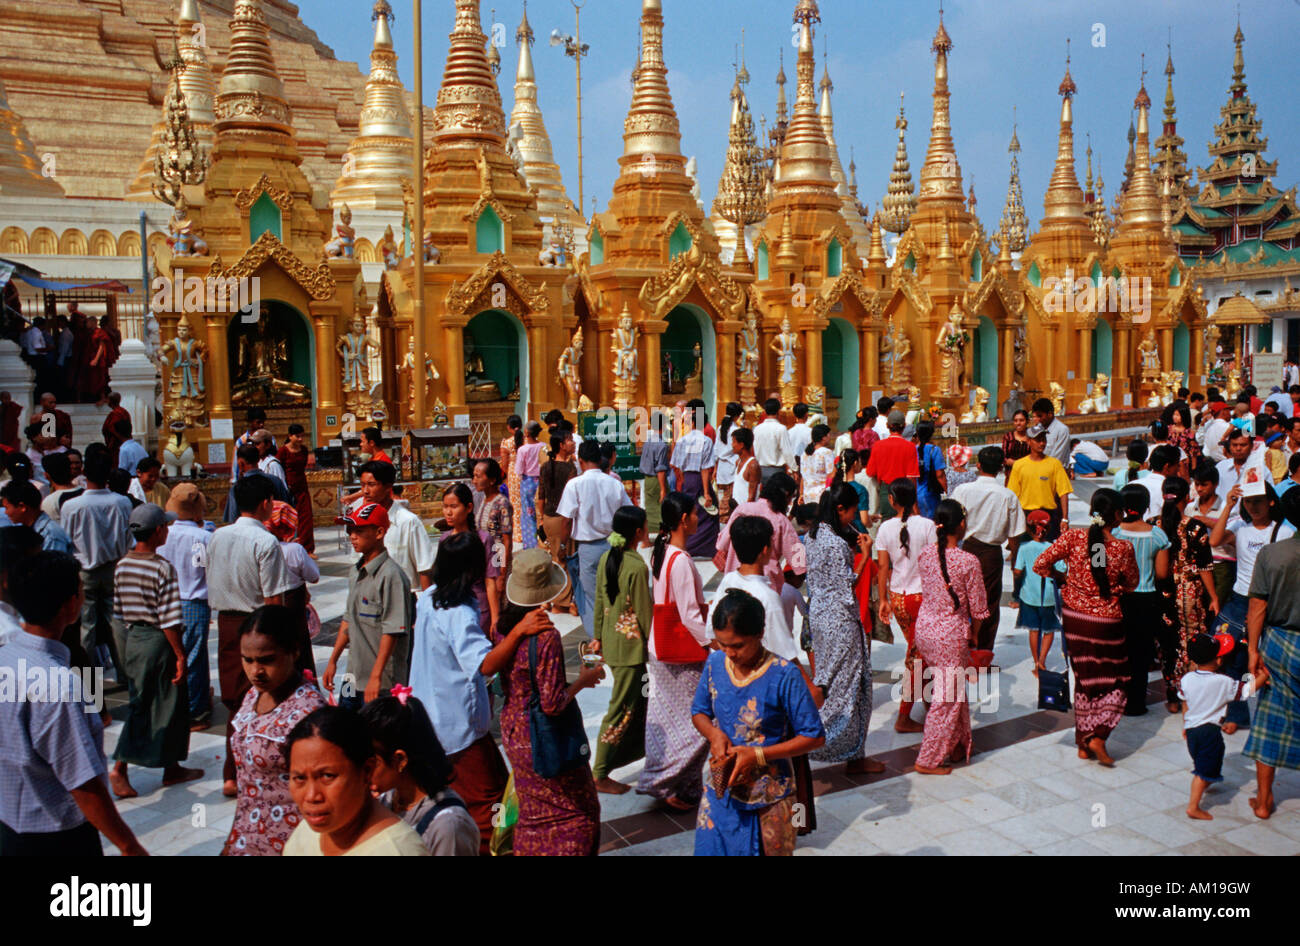 The Shwedagon Pagoda is the most important religious building and the religious centre of Yangon, Burma, Asia Stock Photo